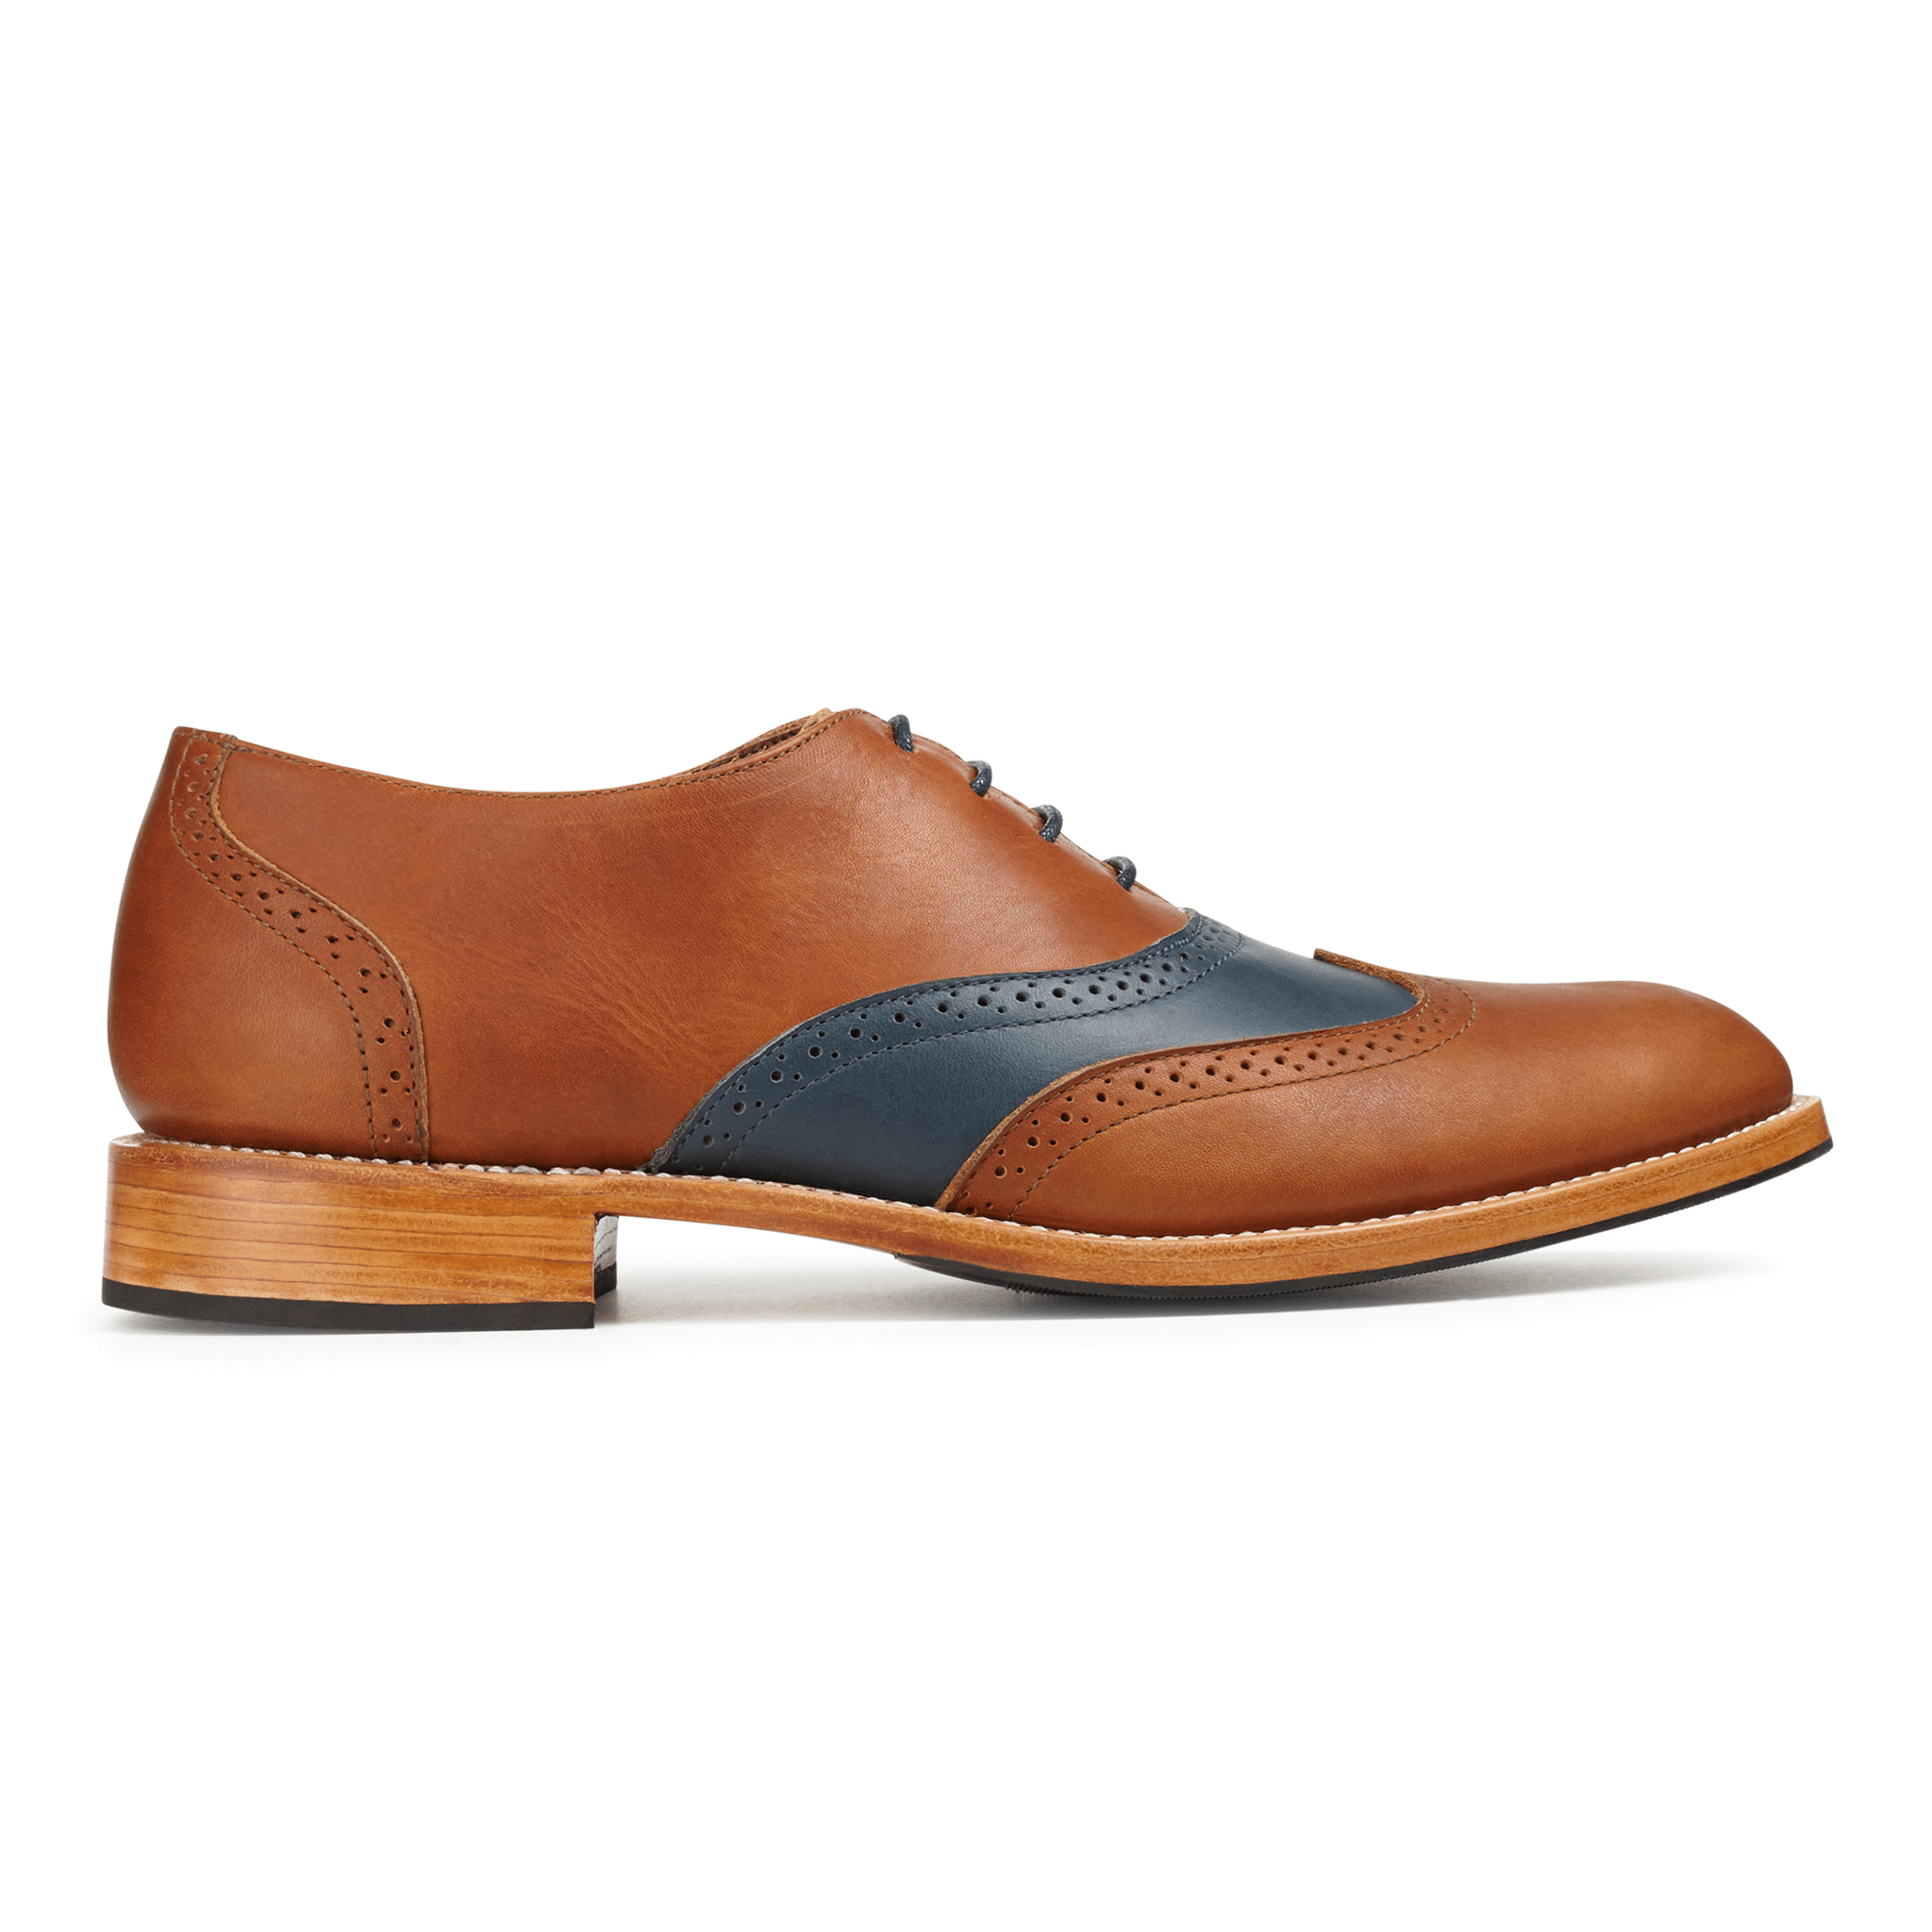 Awesome Handmade Men's Tan Blue Leather Denim Wing Tip Brogue Shoes, Men  Dress Formal Lace Up Shoes